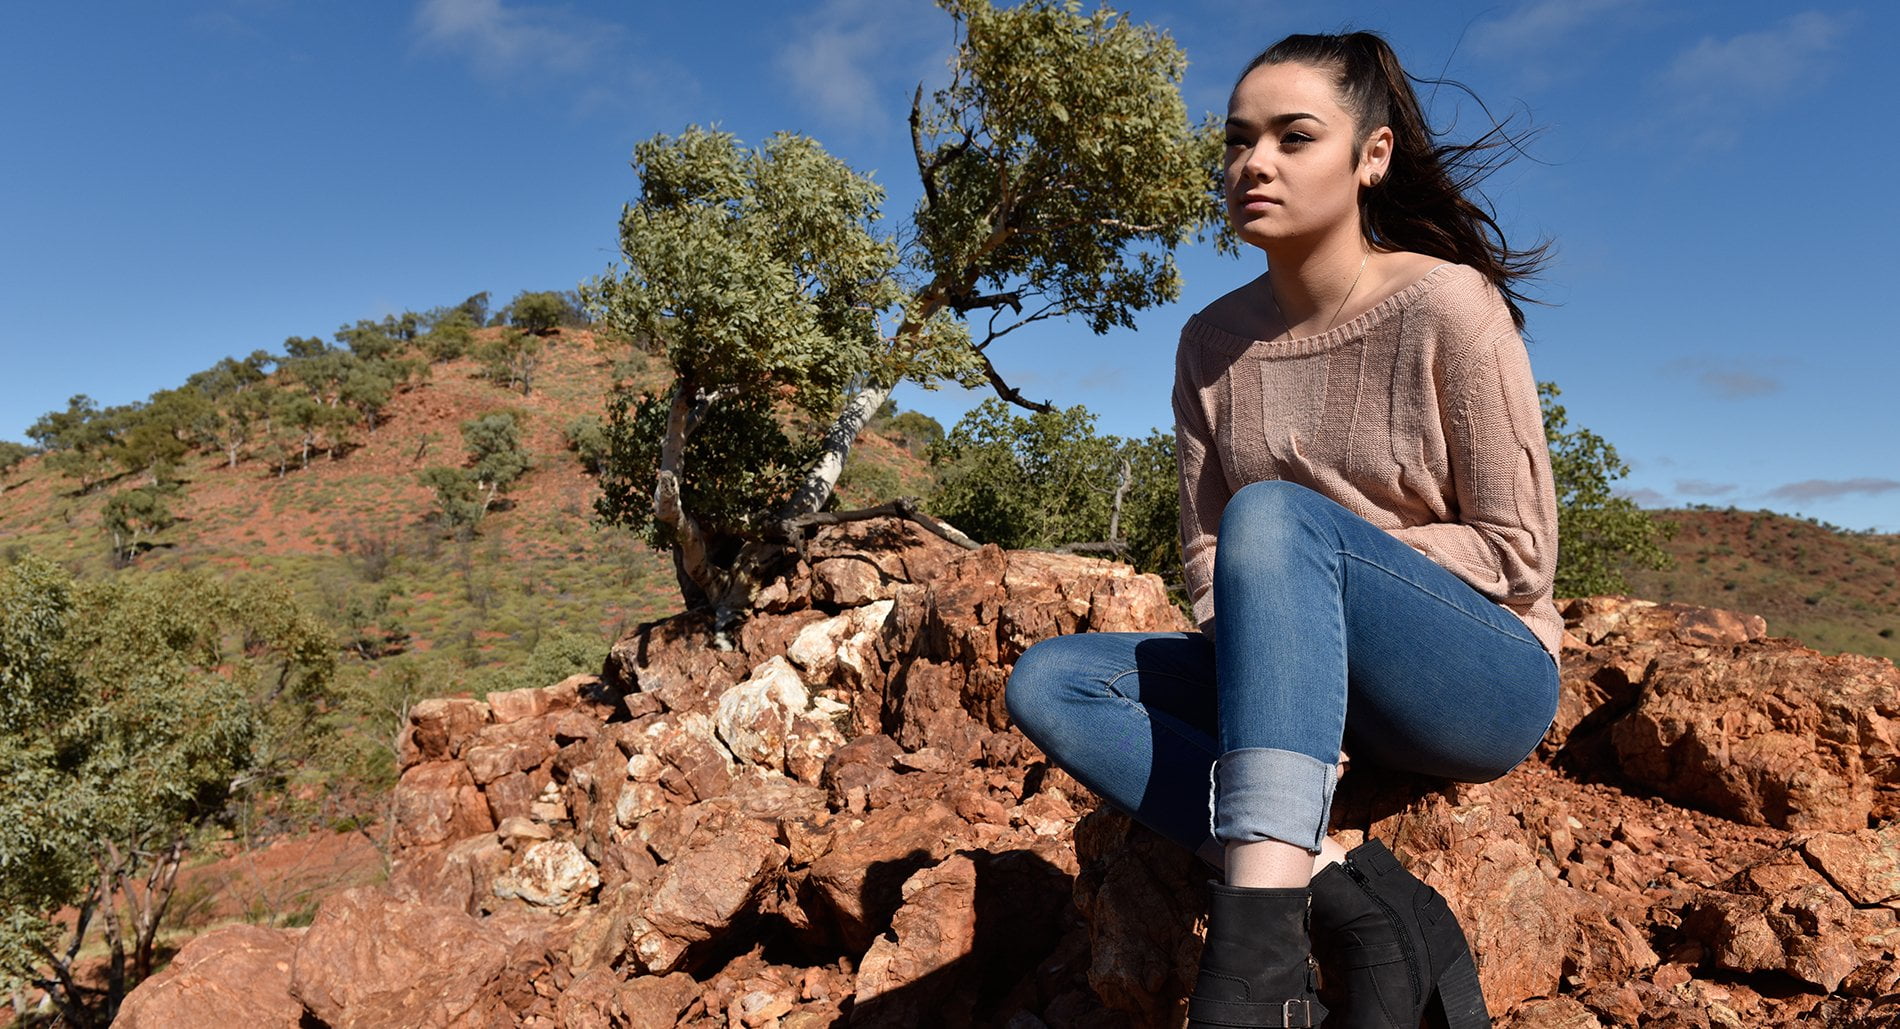 Justice King, a young Indigenous advocate, sits on an escarpment of orange rock